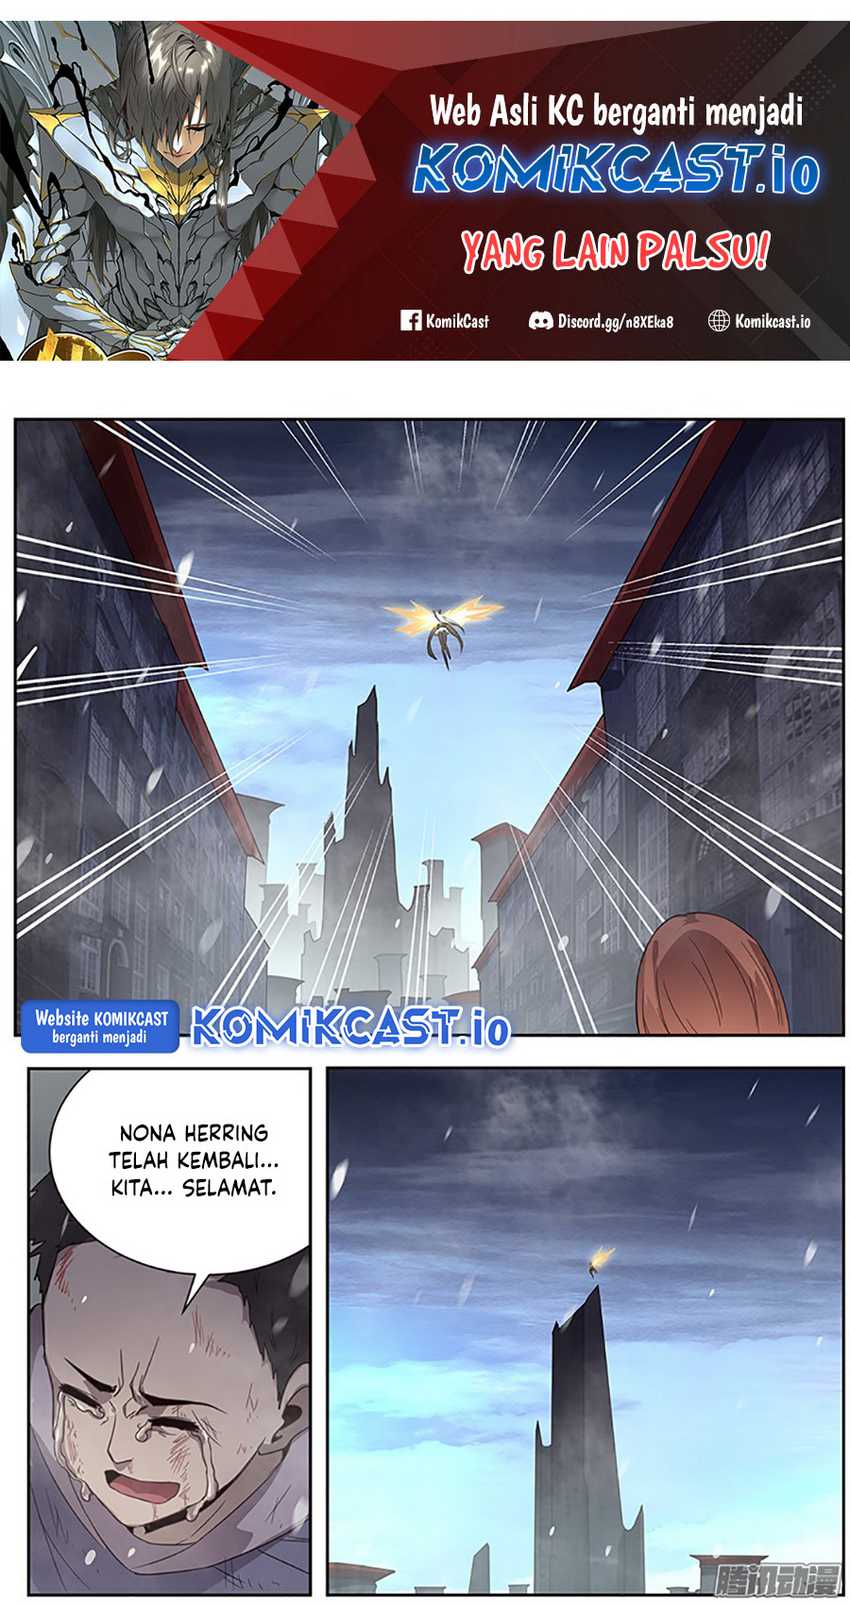 Girl and Science Chapter 241